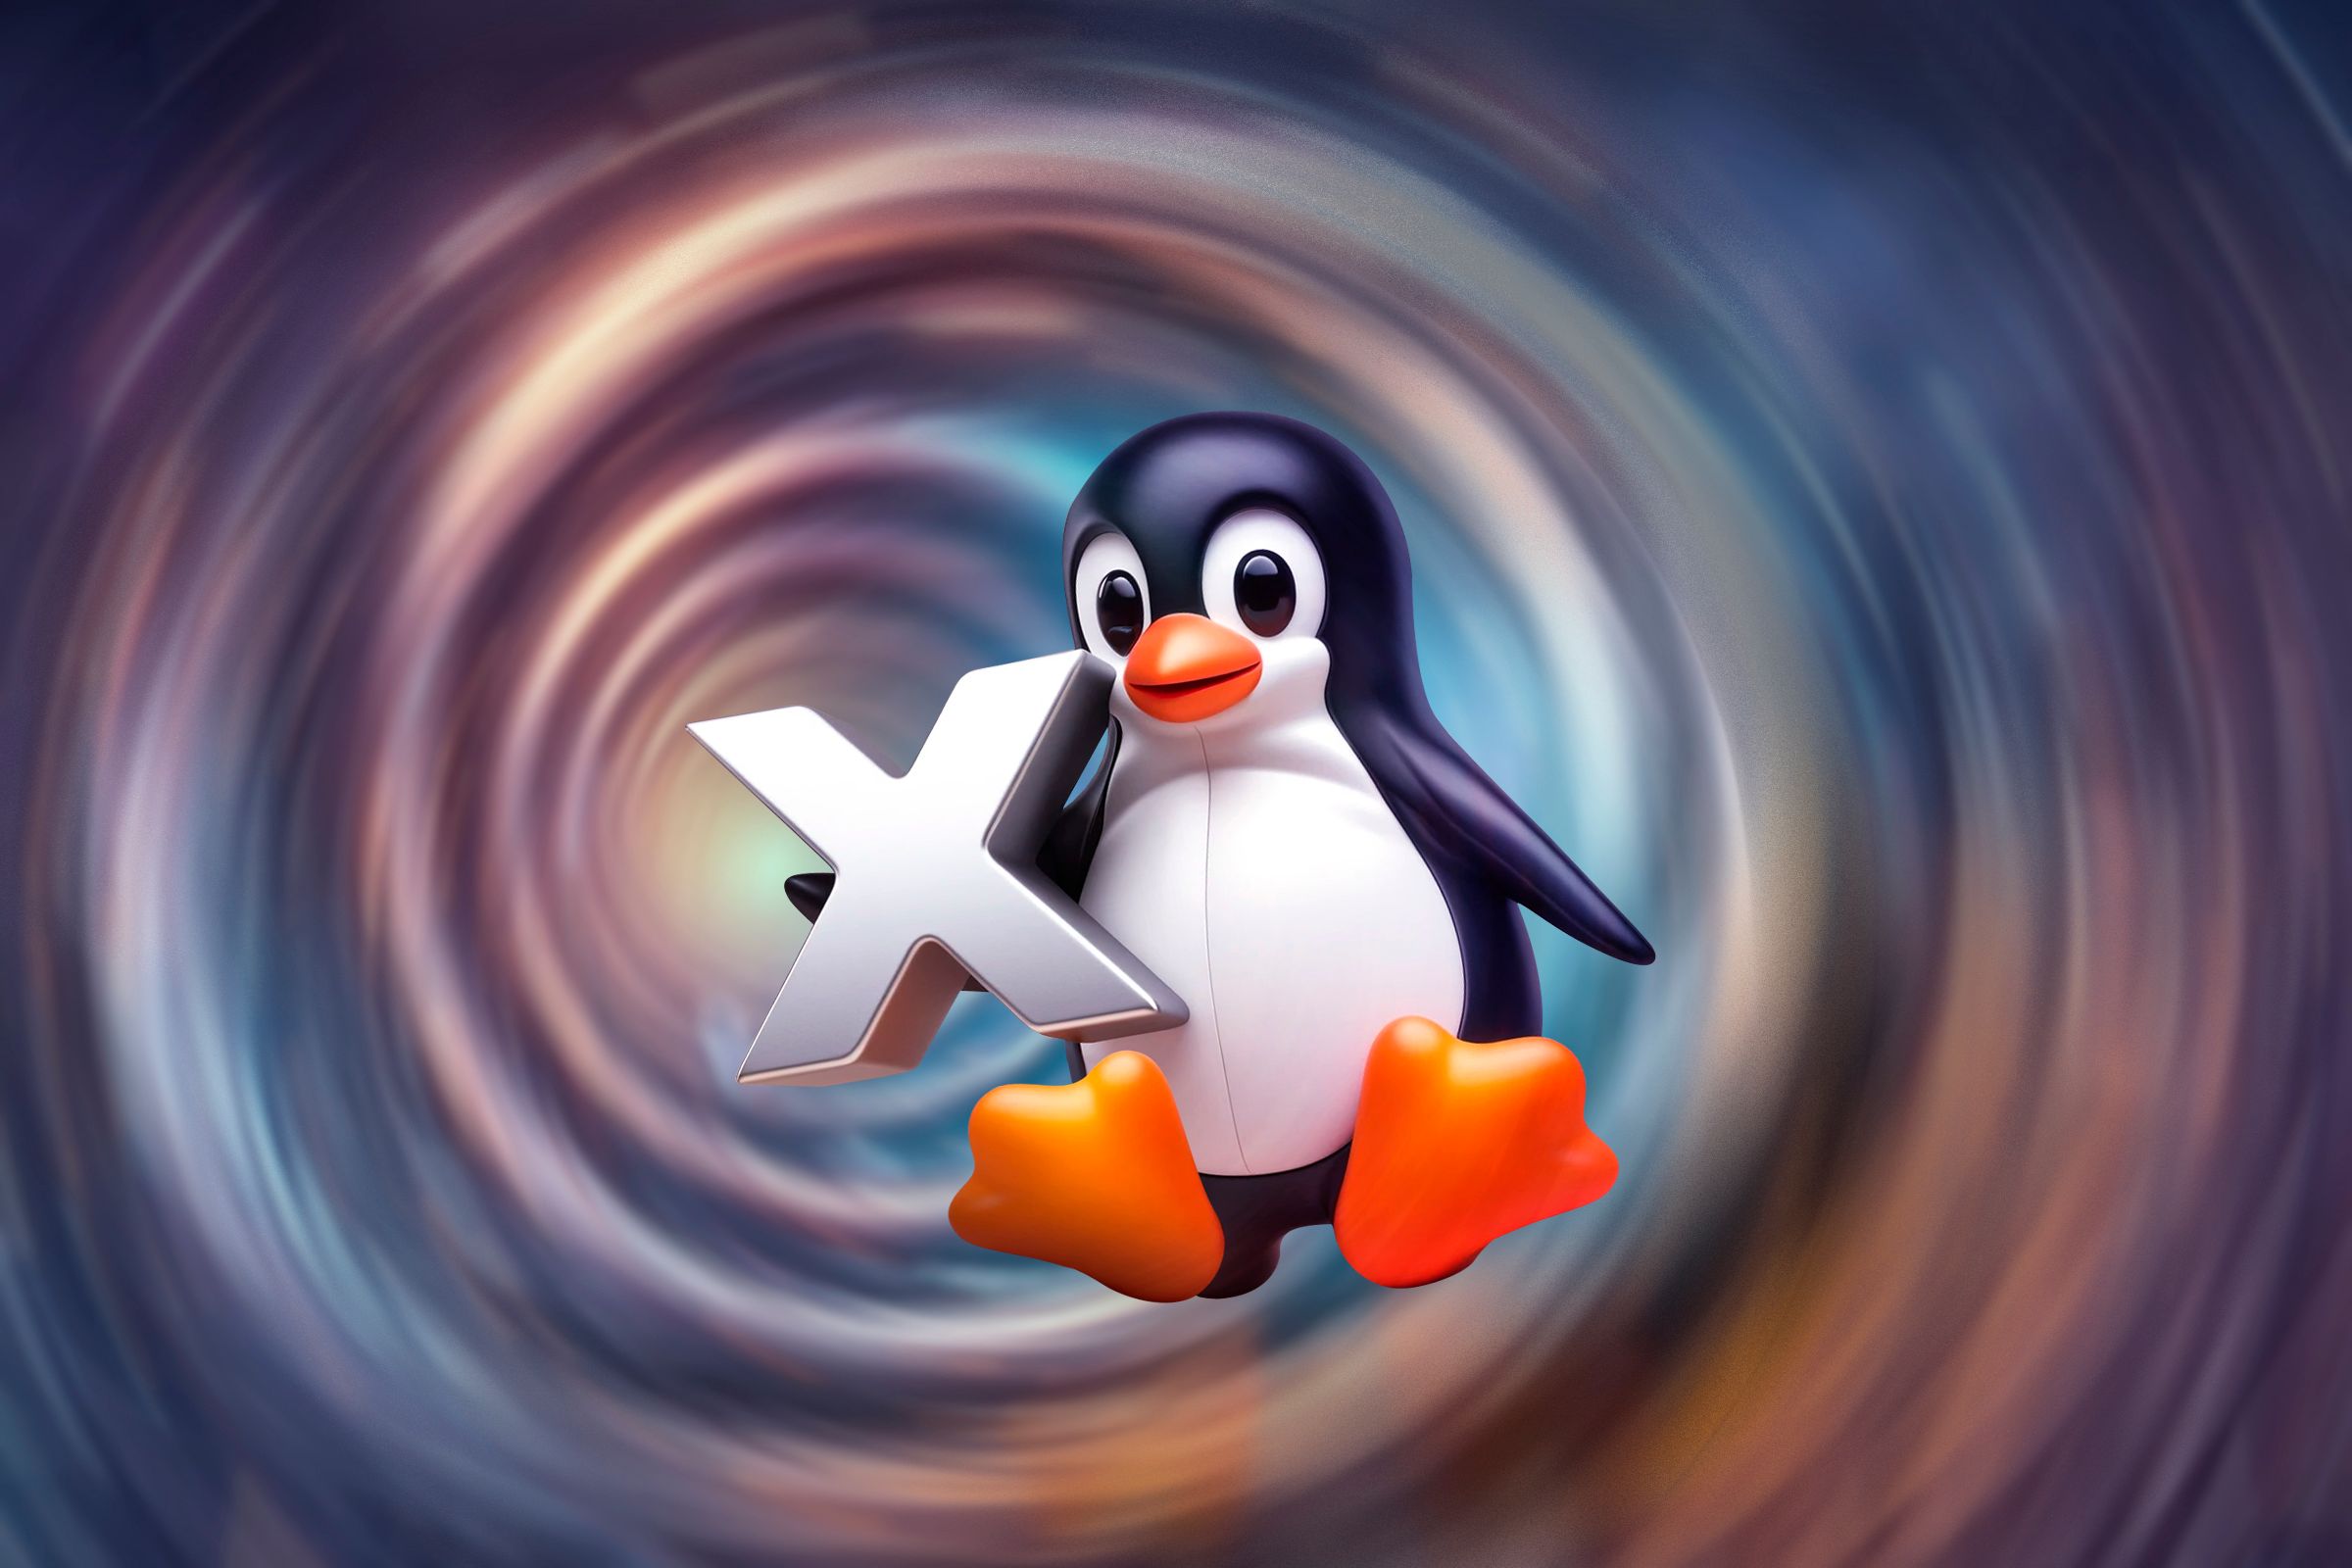 Tux holding the letter 'X'